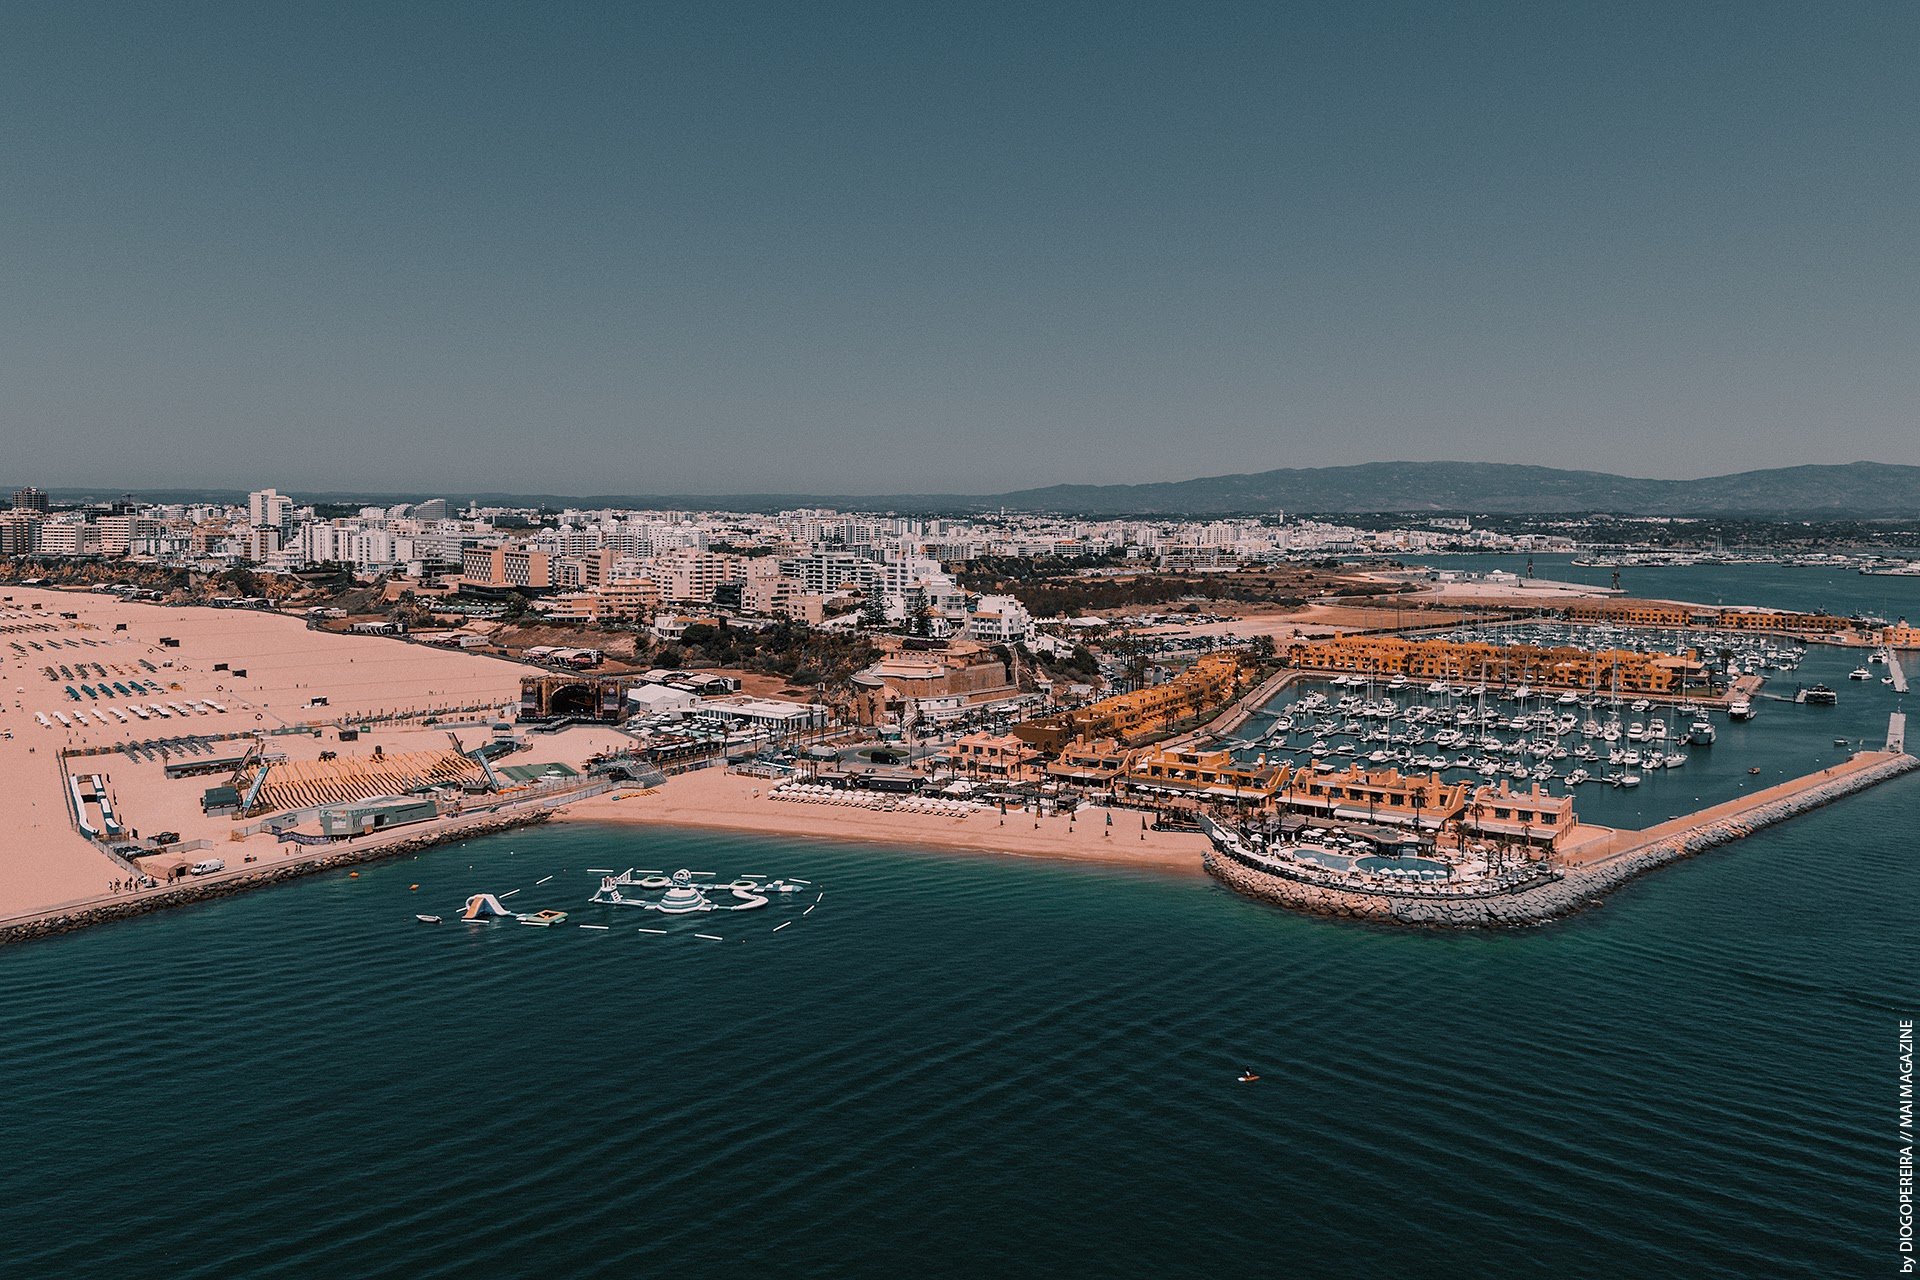 EDC Heads To The Beach In Portugal In 2021 With Incredible Phase 1 Lineup